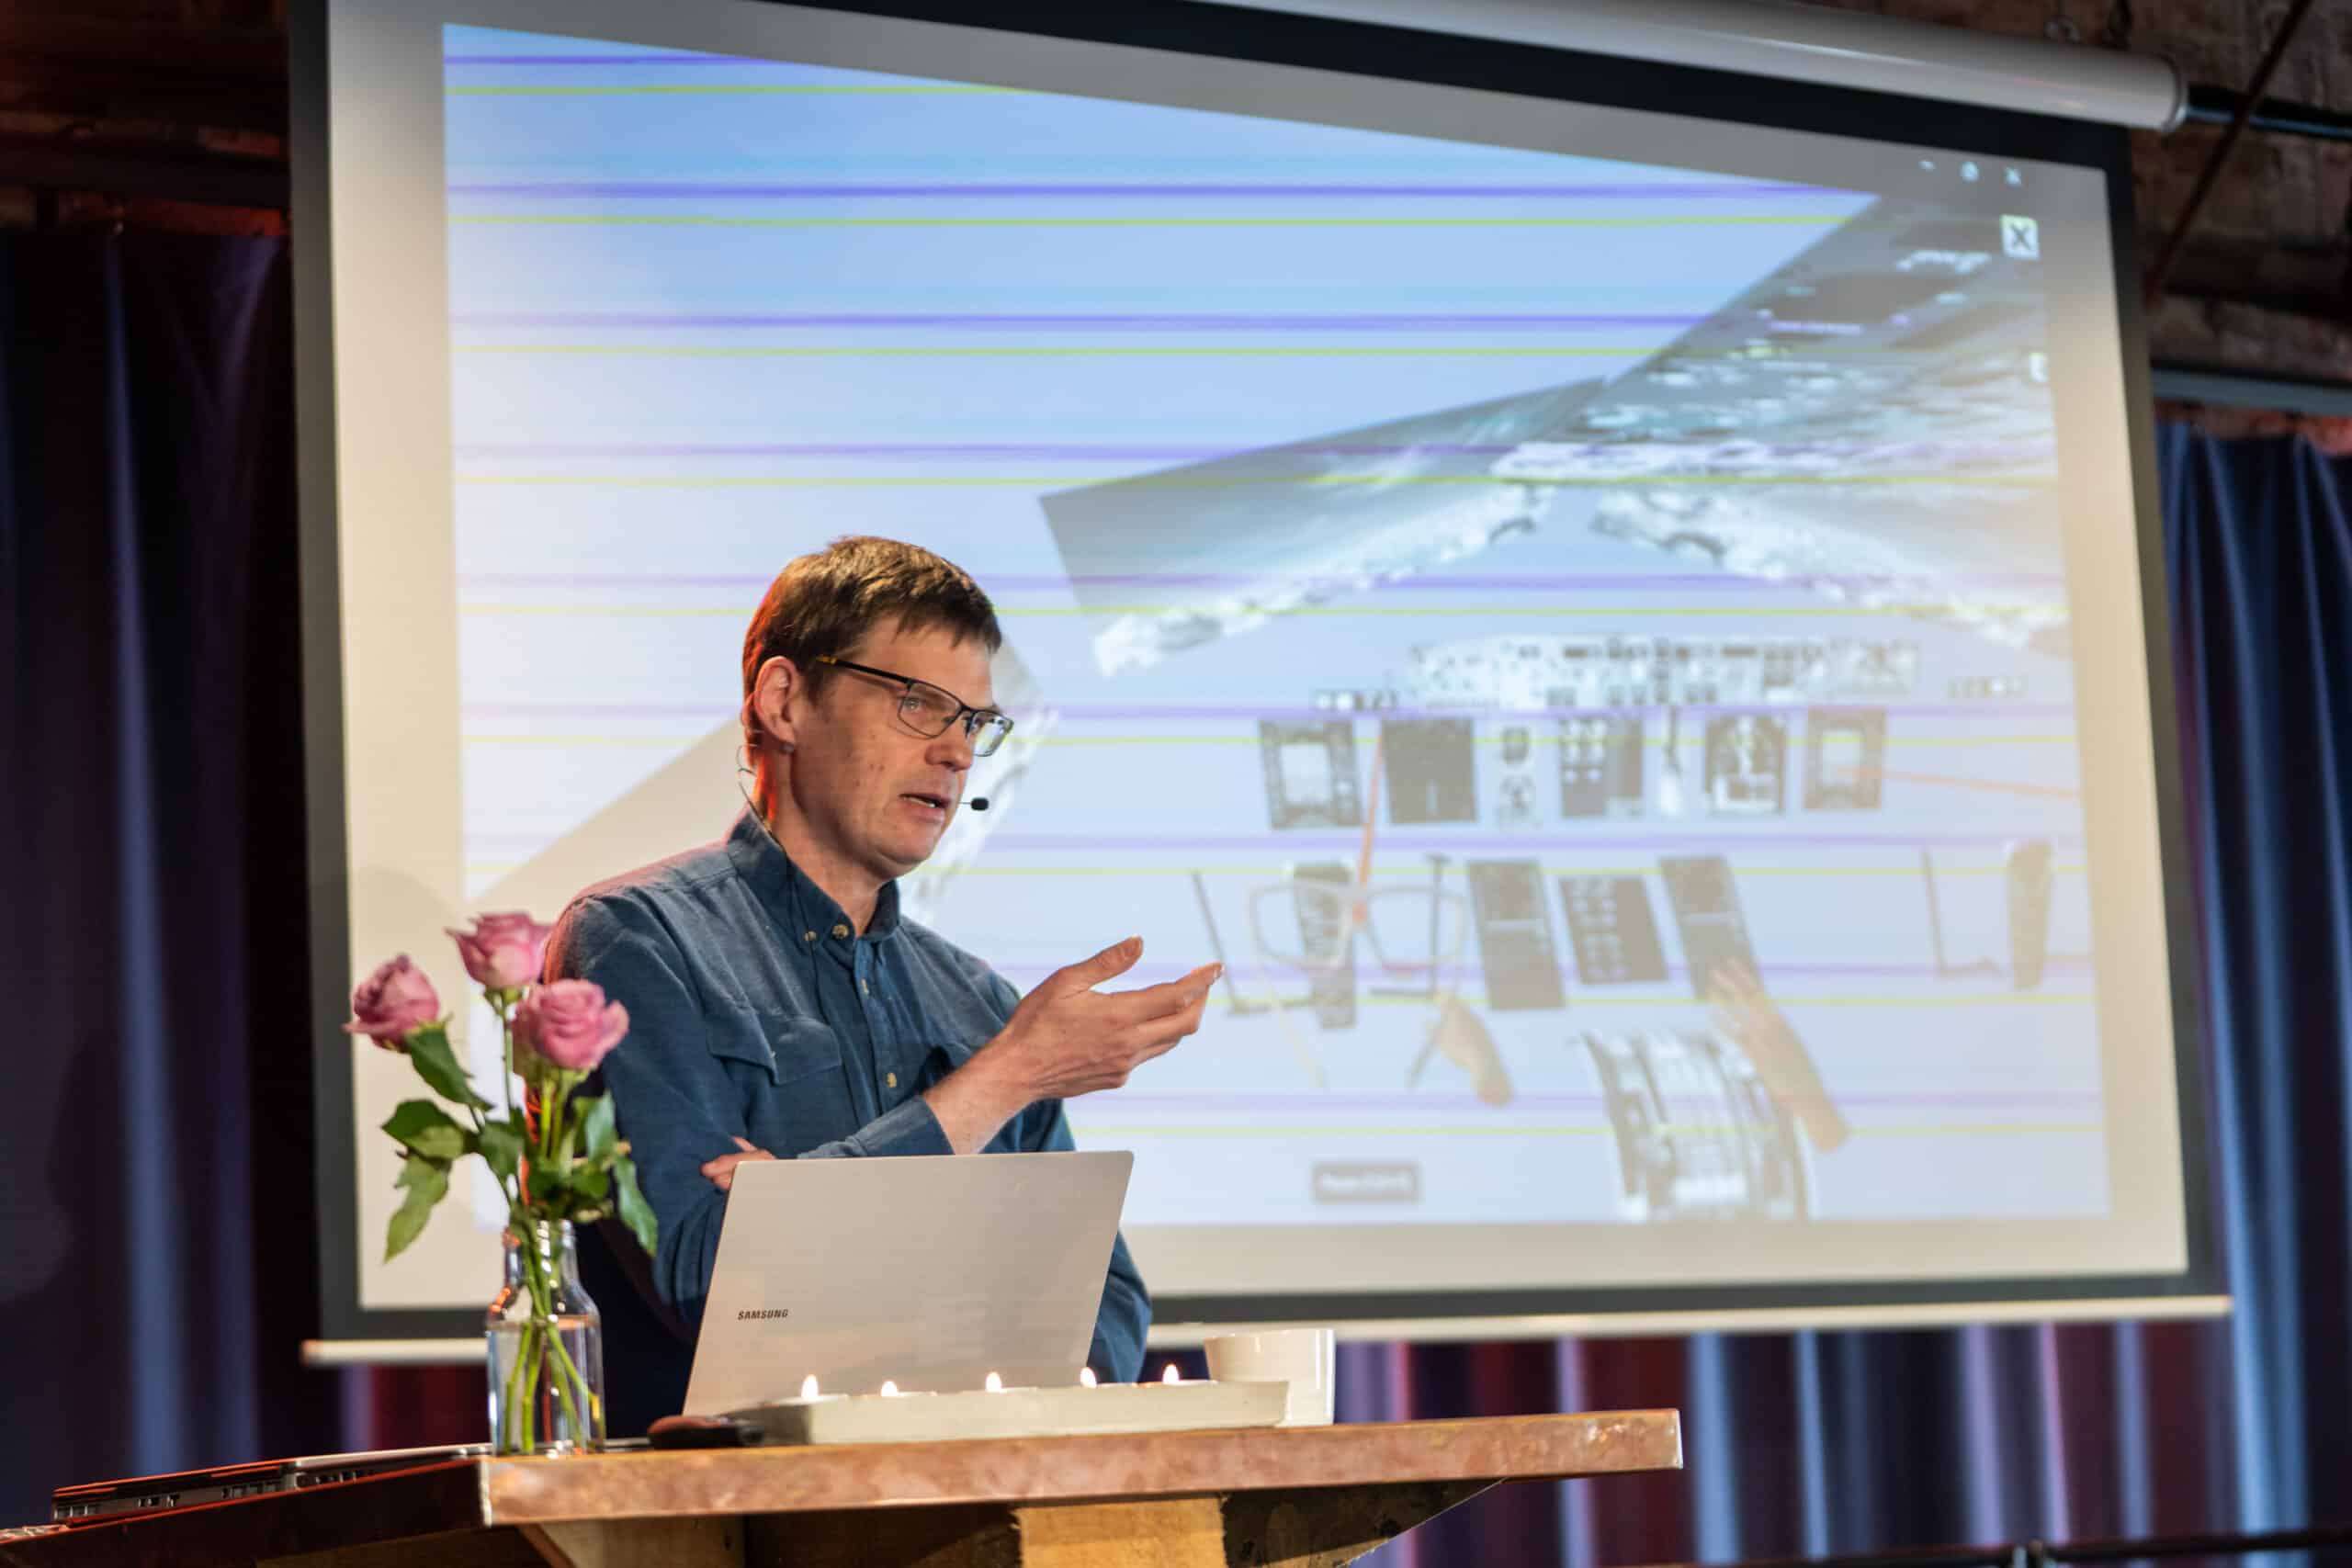 IFE's session was about Ethical Considerations when using AI, and Benefits of Applied AI in Decommissioning. They also demonstrated three examples of how AI is applied with success for industry, for science and for fun. PHOTO: Stein Johnsen, ContentVideo